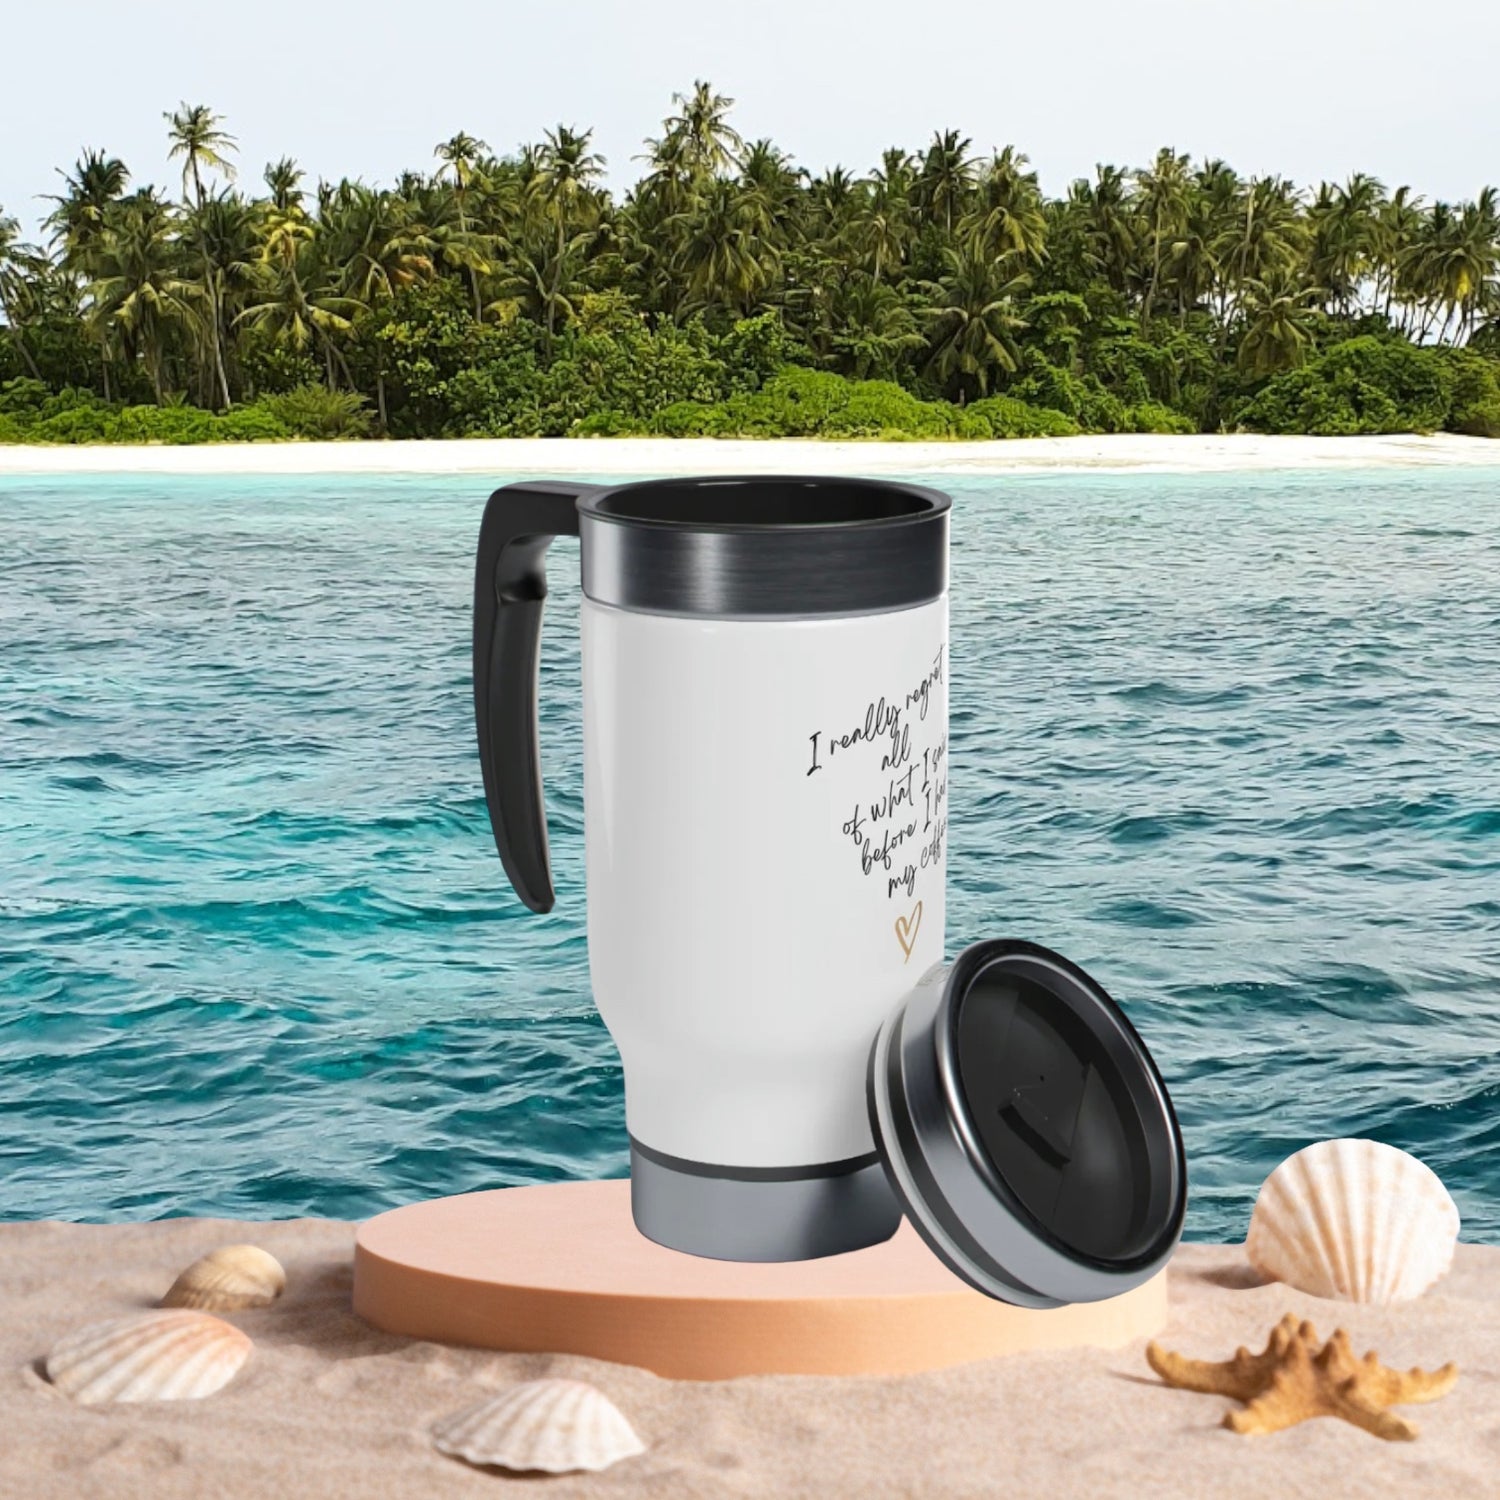 New Stainless Steel Travel Mug with Handle, 14oz